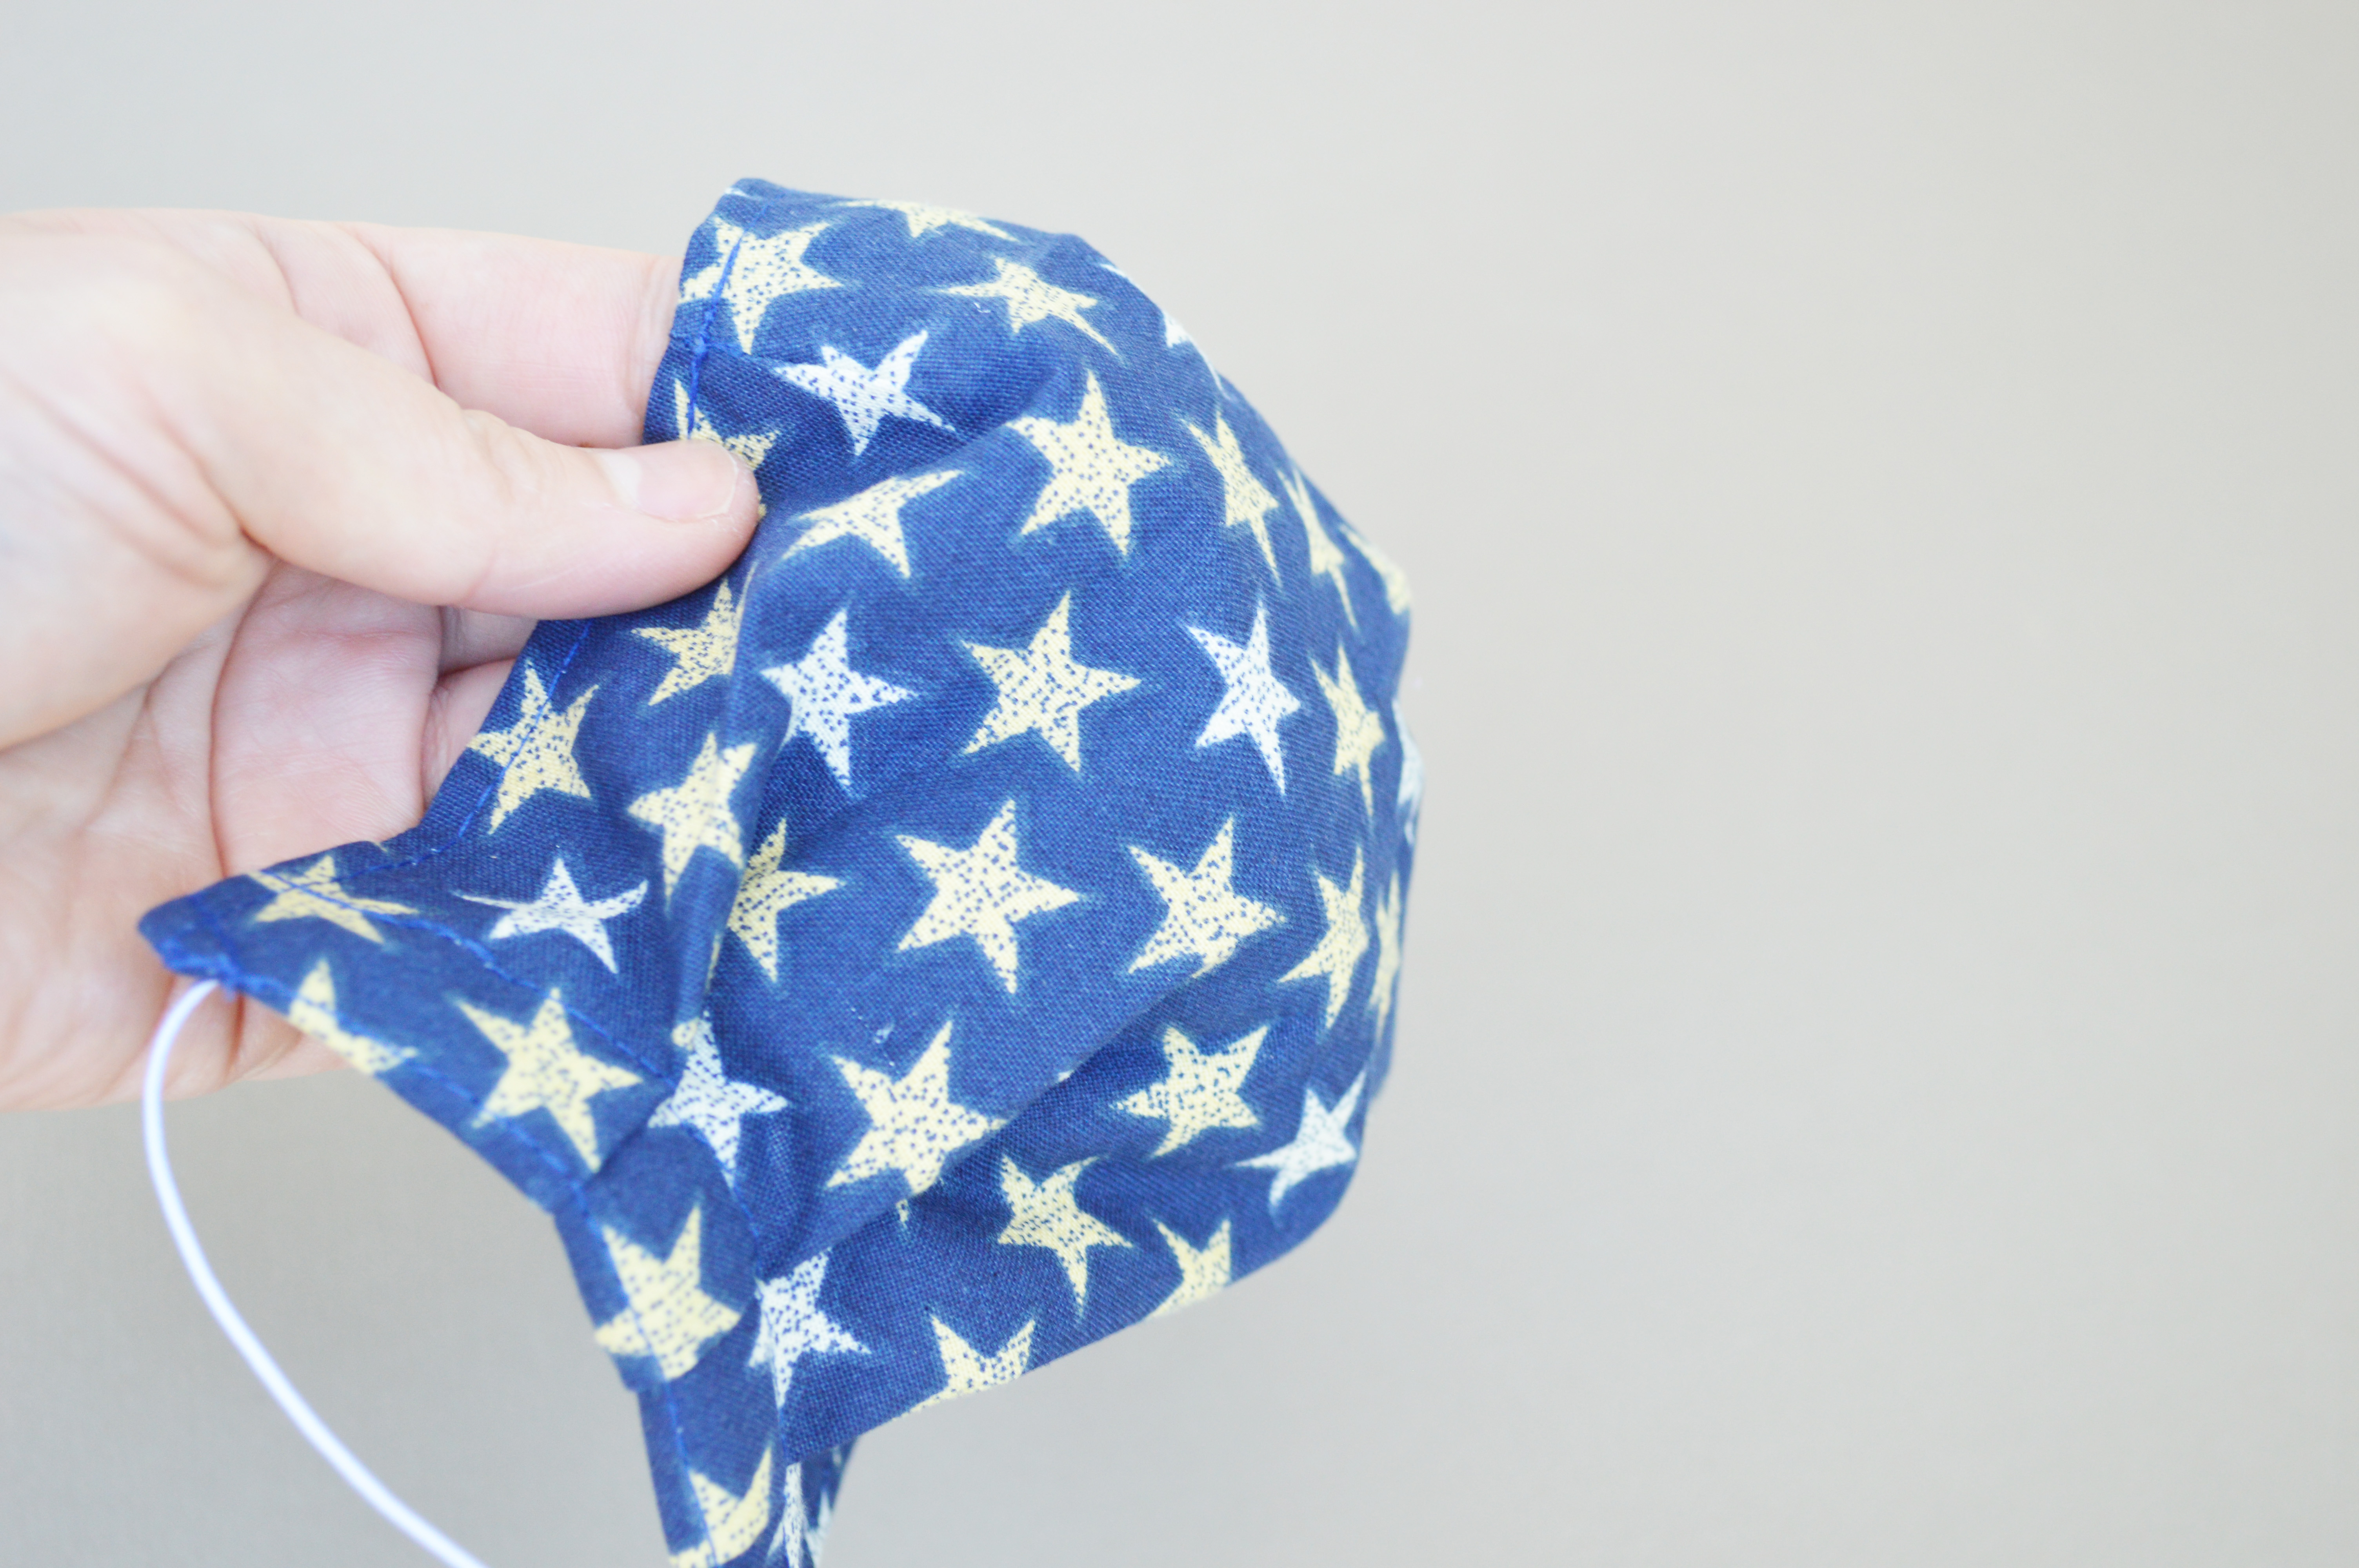 Image of blue cotton-fabric mask with white and gold star pattern